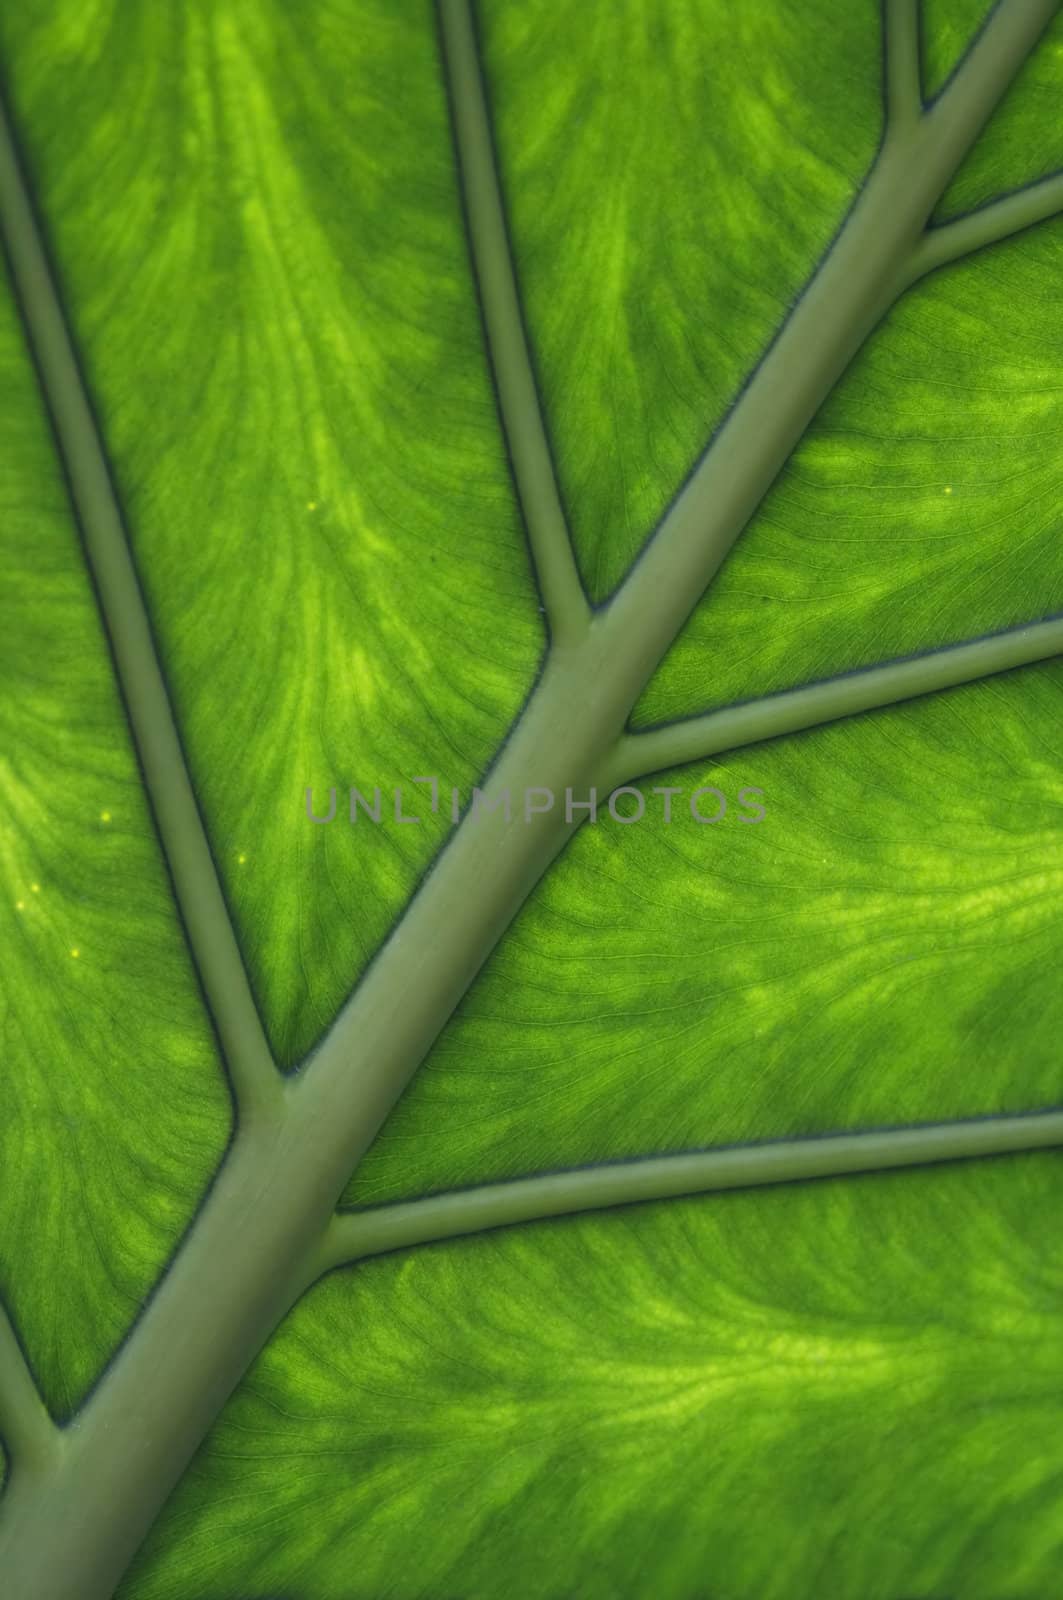 Abstract detail of the leaf